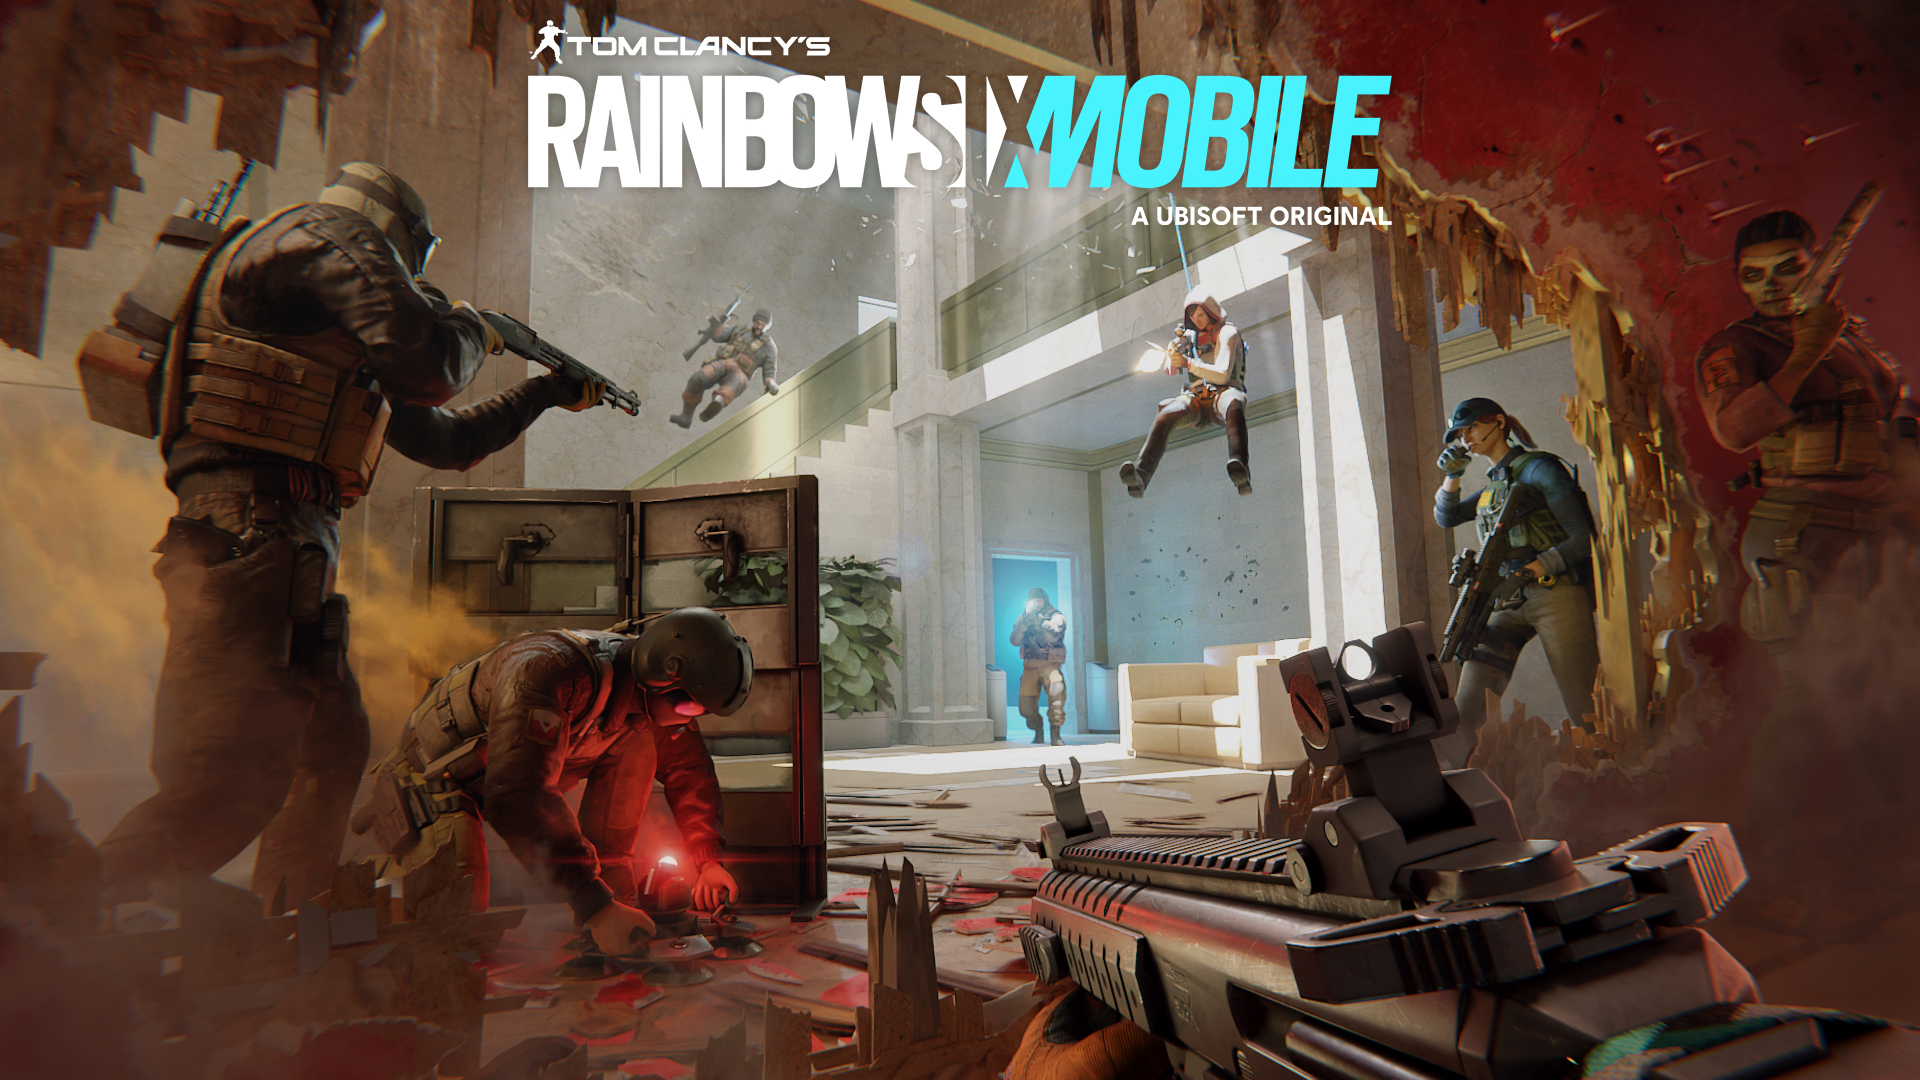 Rainbow Six Mobile APK Download for Android Free